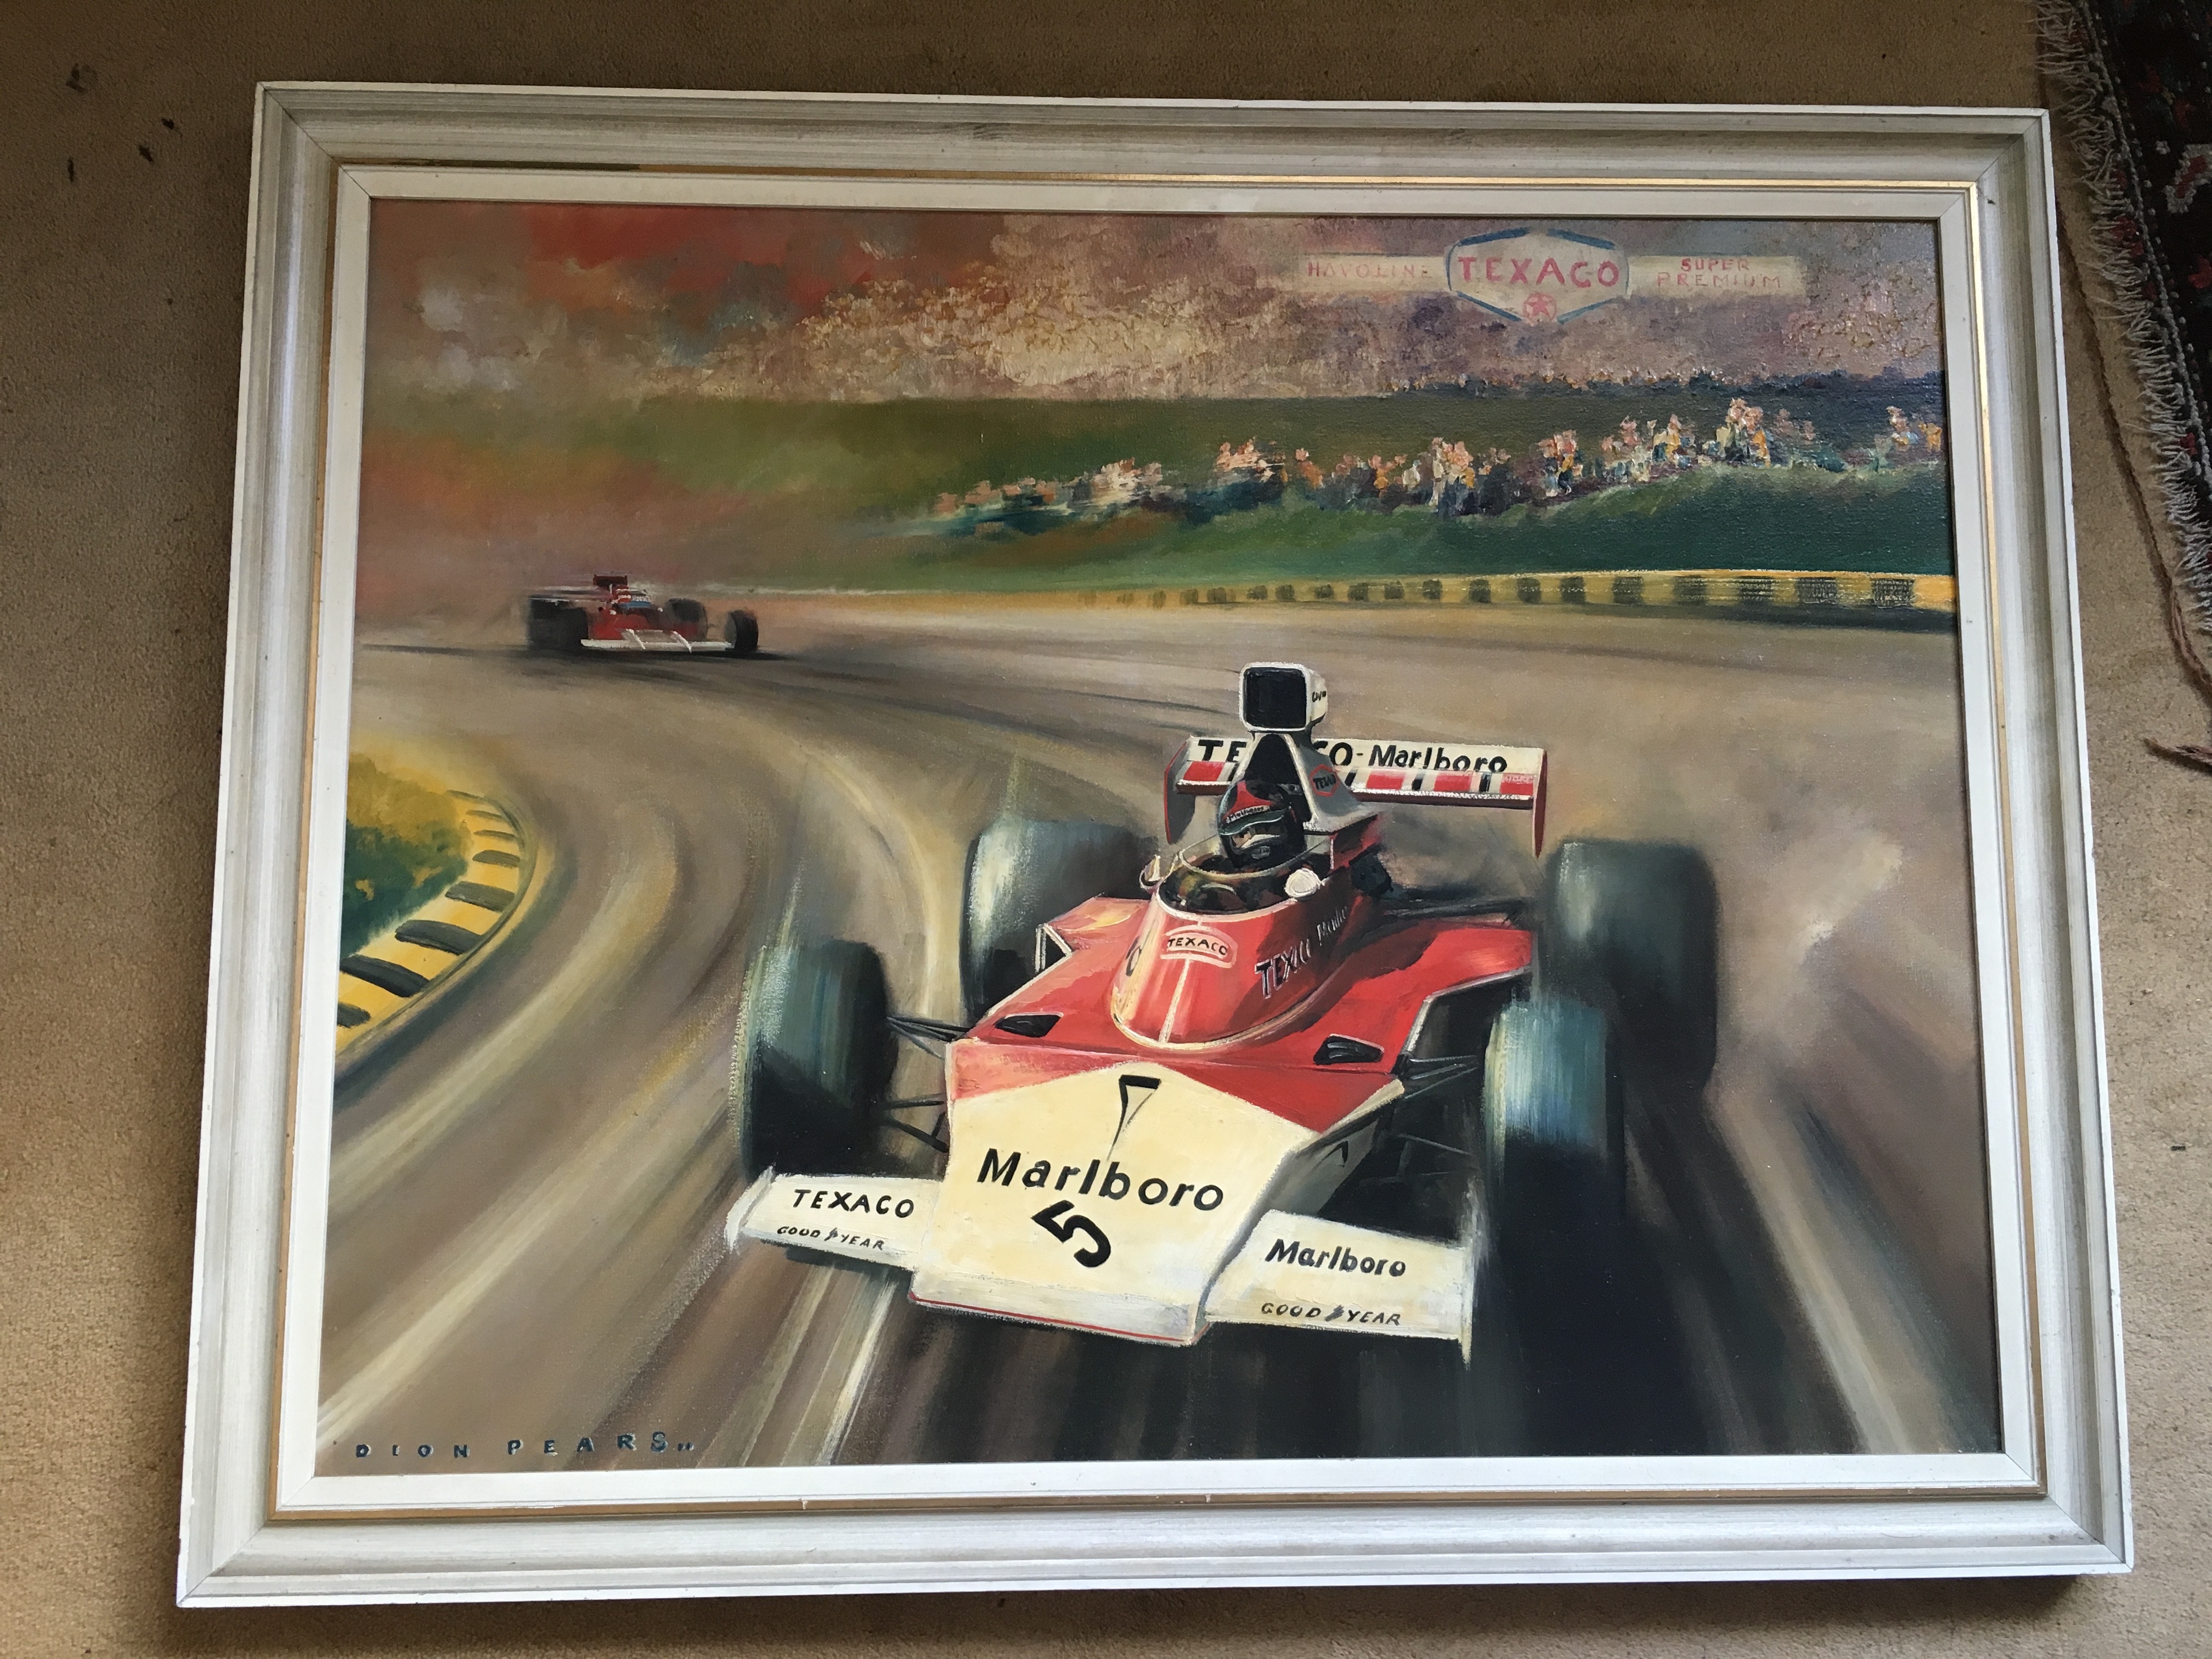 DION PEARS oil on canvas Marlboro 5 racing car driven by Emerson Fittipaldi 70 x 90